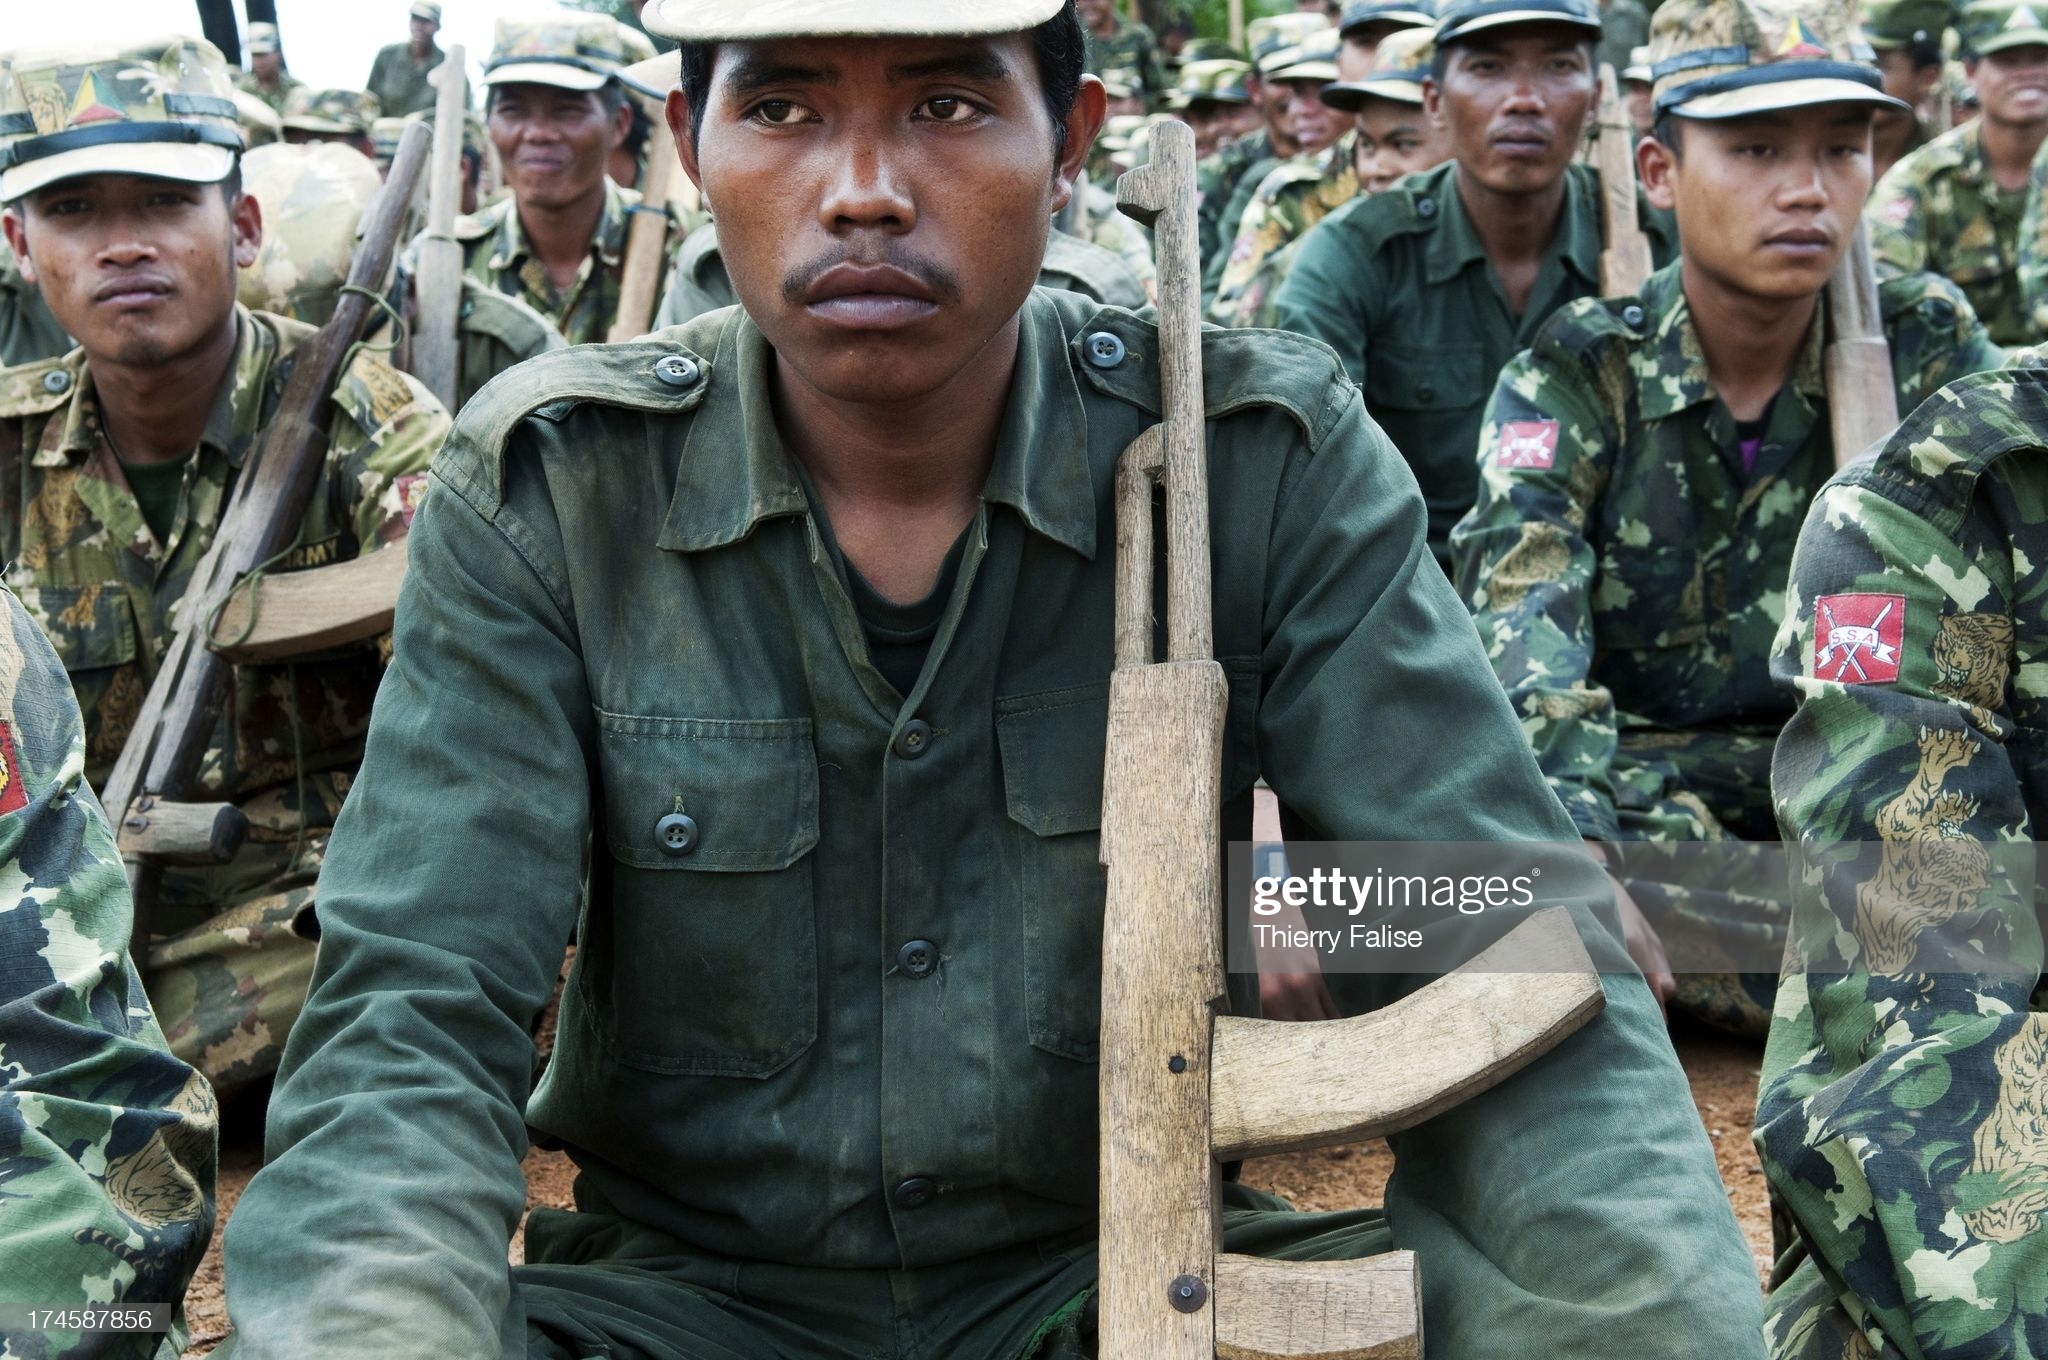 officers-from-the-shan-state-army-south-during-a-training-session-an-picture-id174587856s=2048x2048.jpg